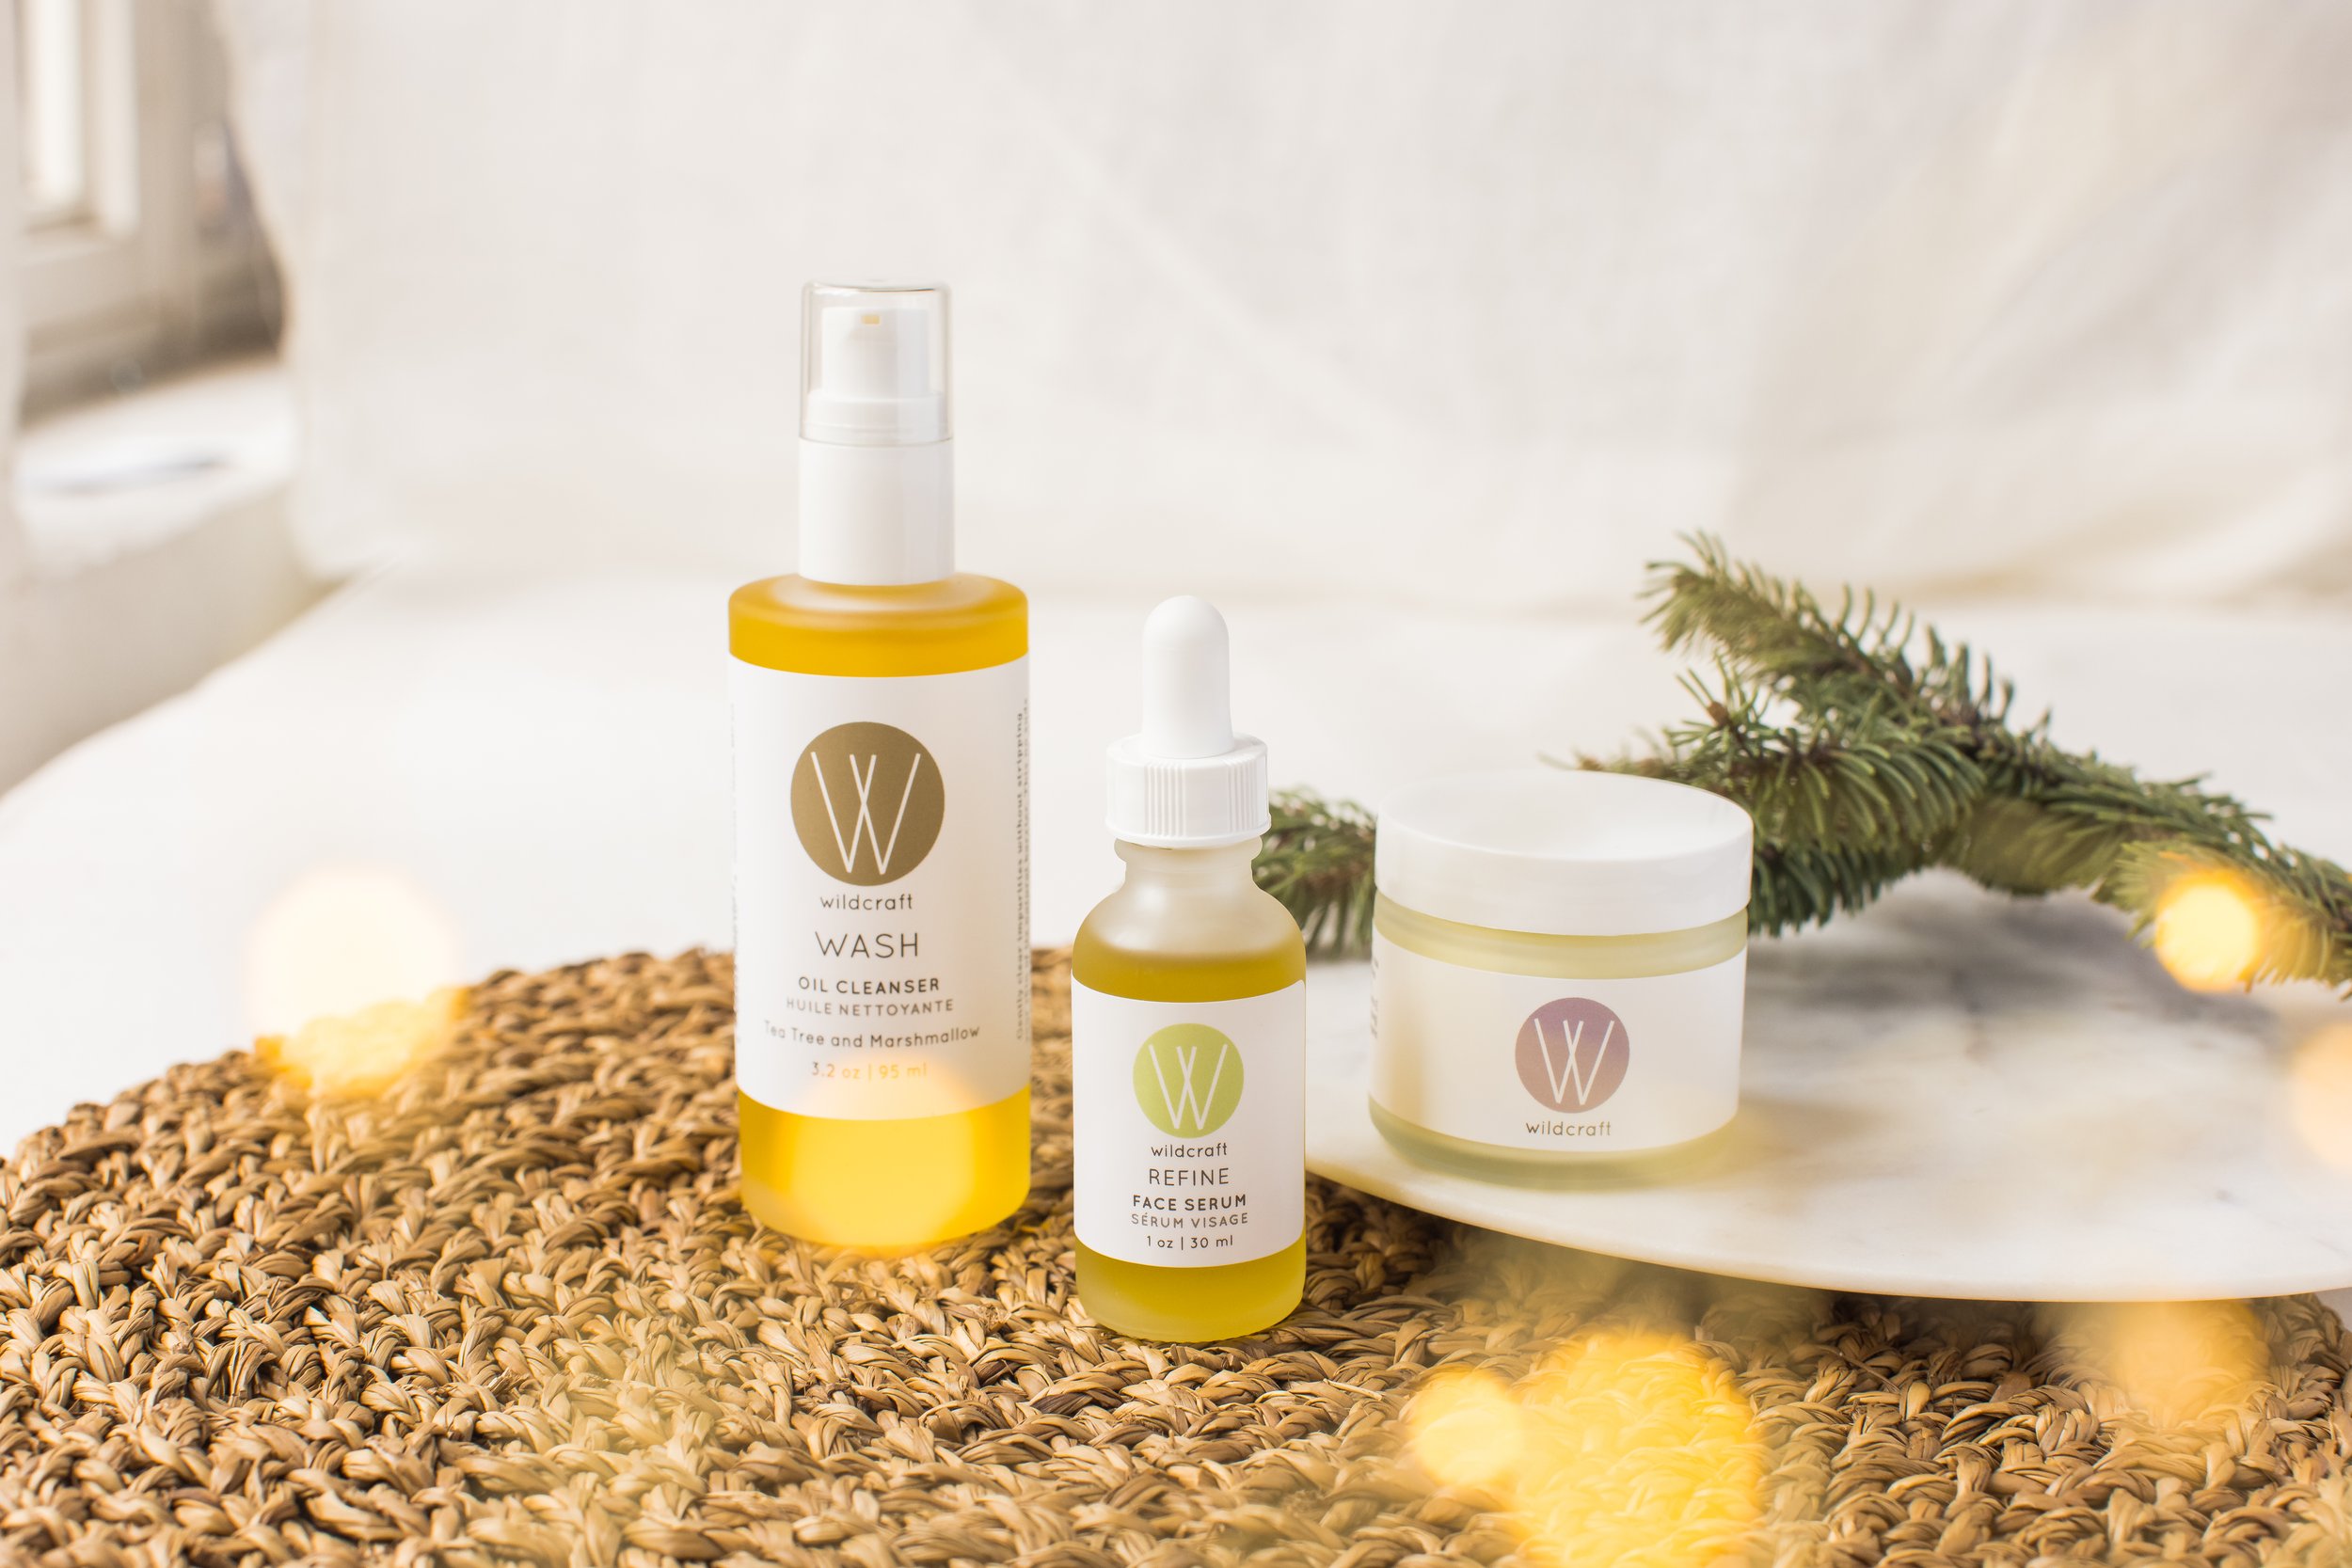 Wildcraft Skincare Products - $22.00 - $28.00